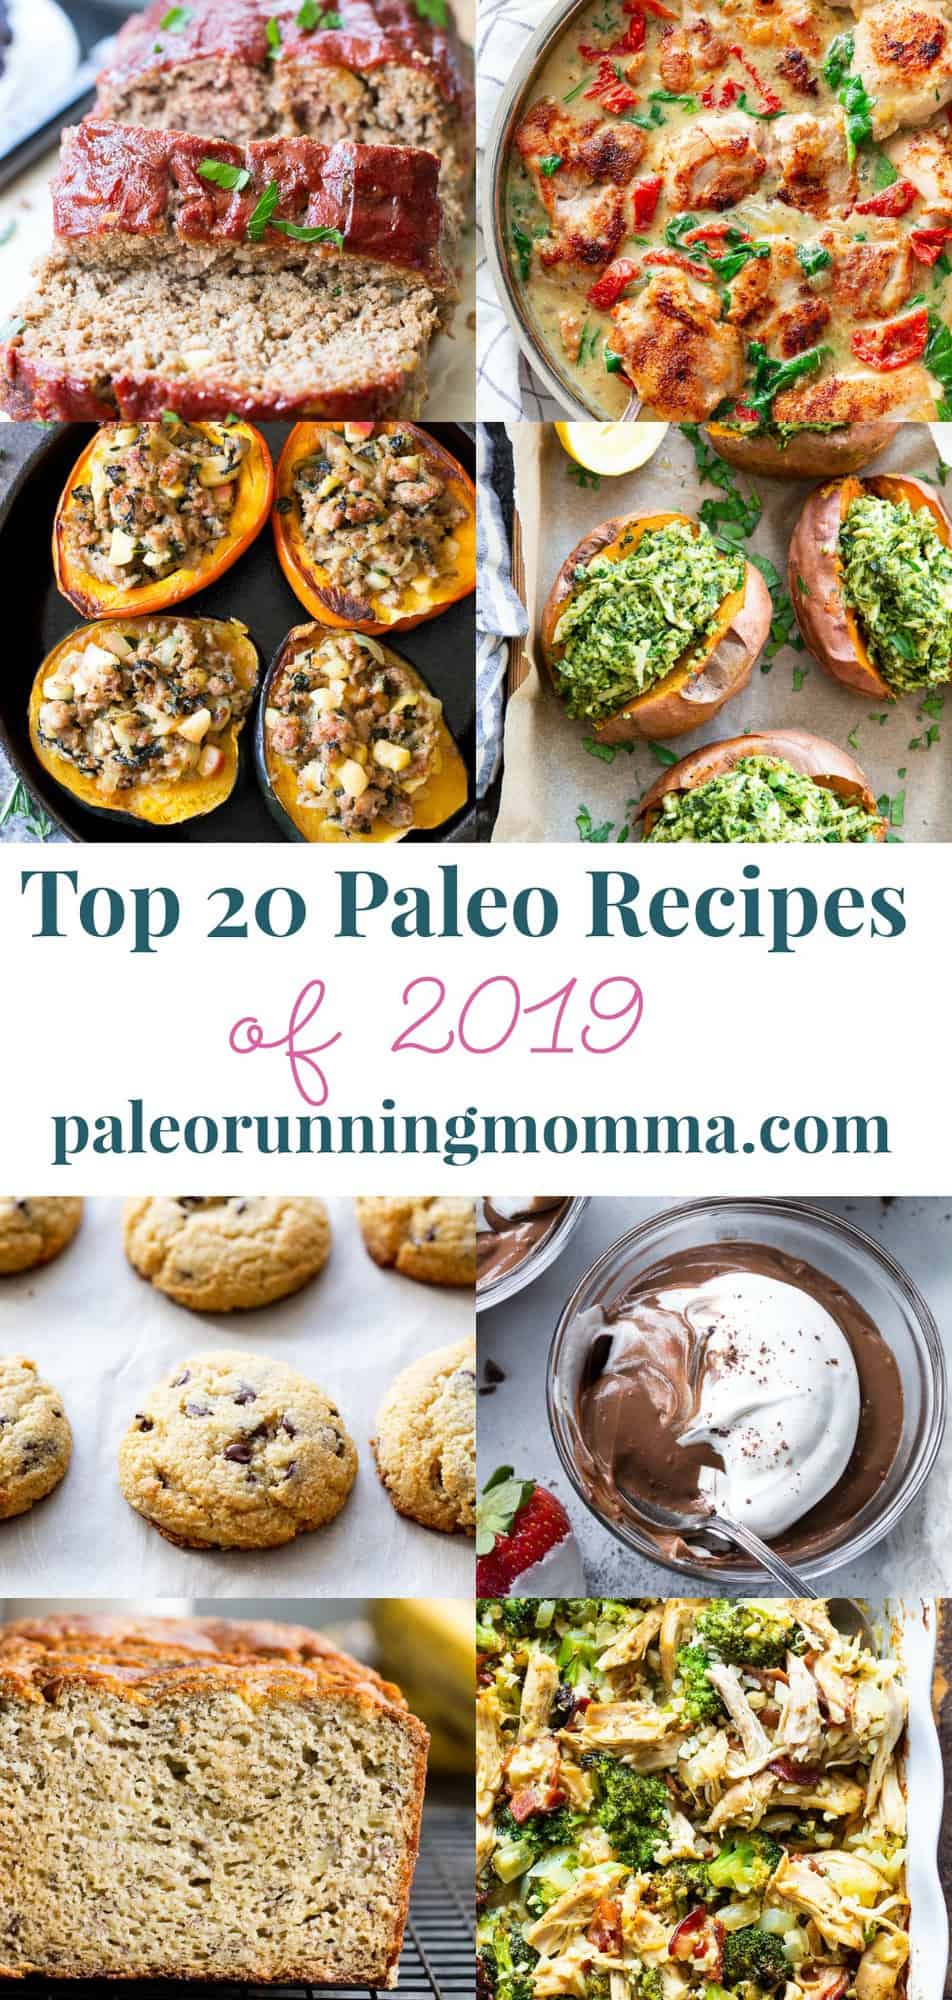 The top 20 paleo recipes from Paleo Running Momma of 2019. Everything from paleo and Whole30 breakfast recipes, make ahead lunches and easy, tasty clean eating paleo dinners that everyone will love! Plus delicious paleo baking and dessert recipes.